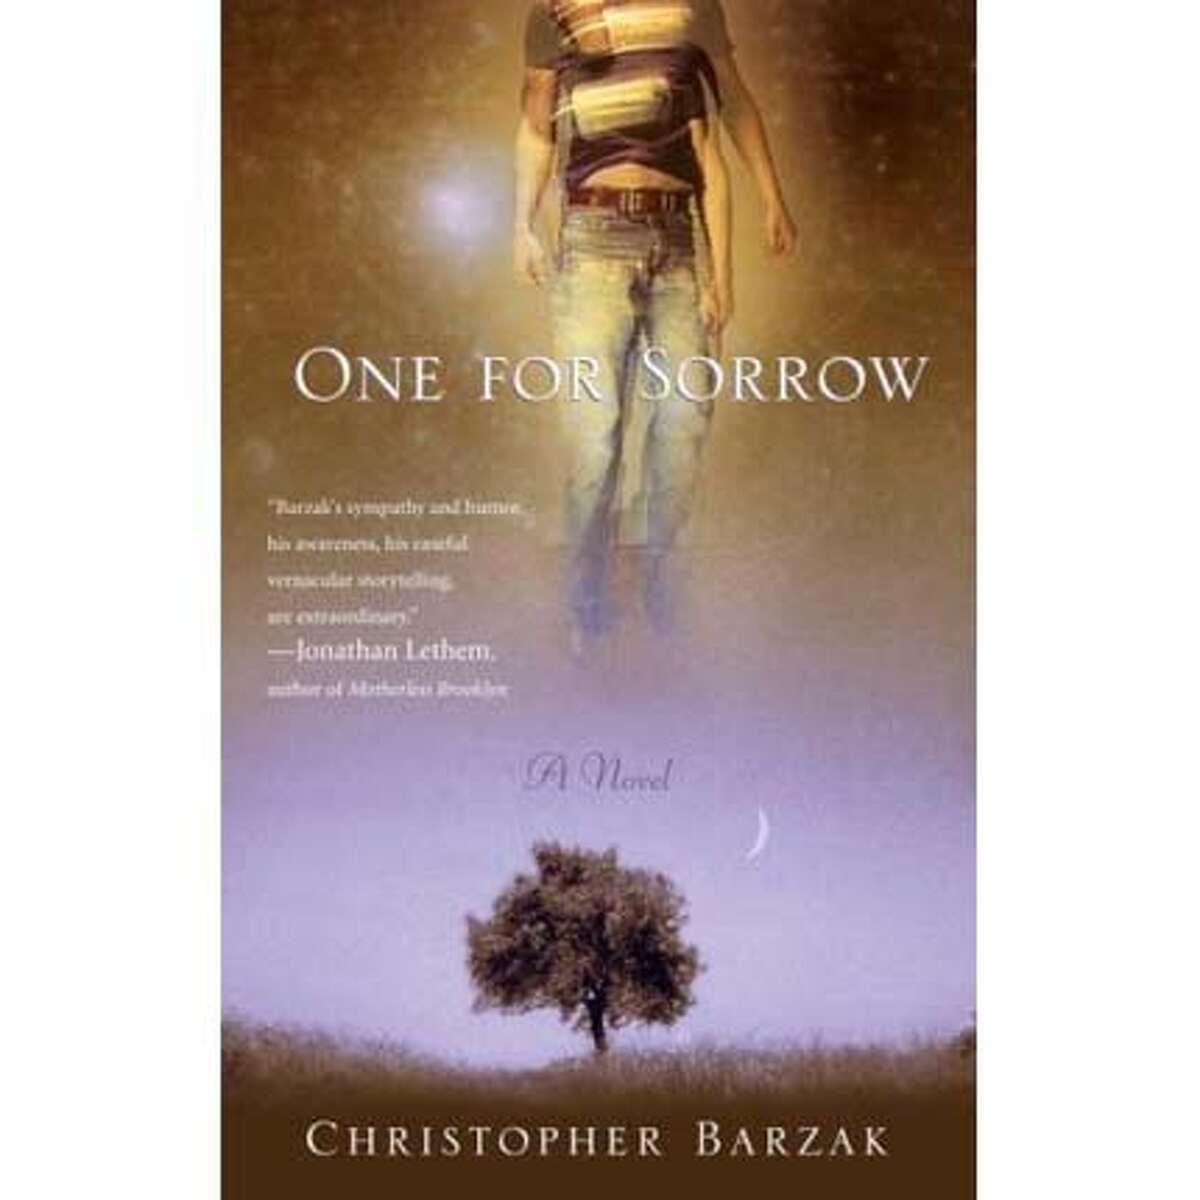 Book cover: "One for Sorrow"